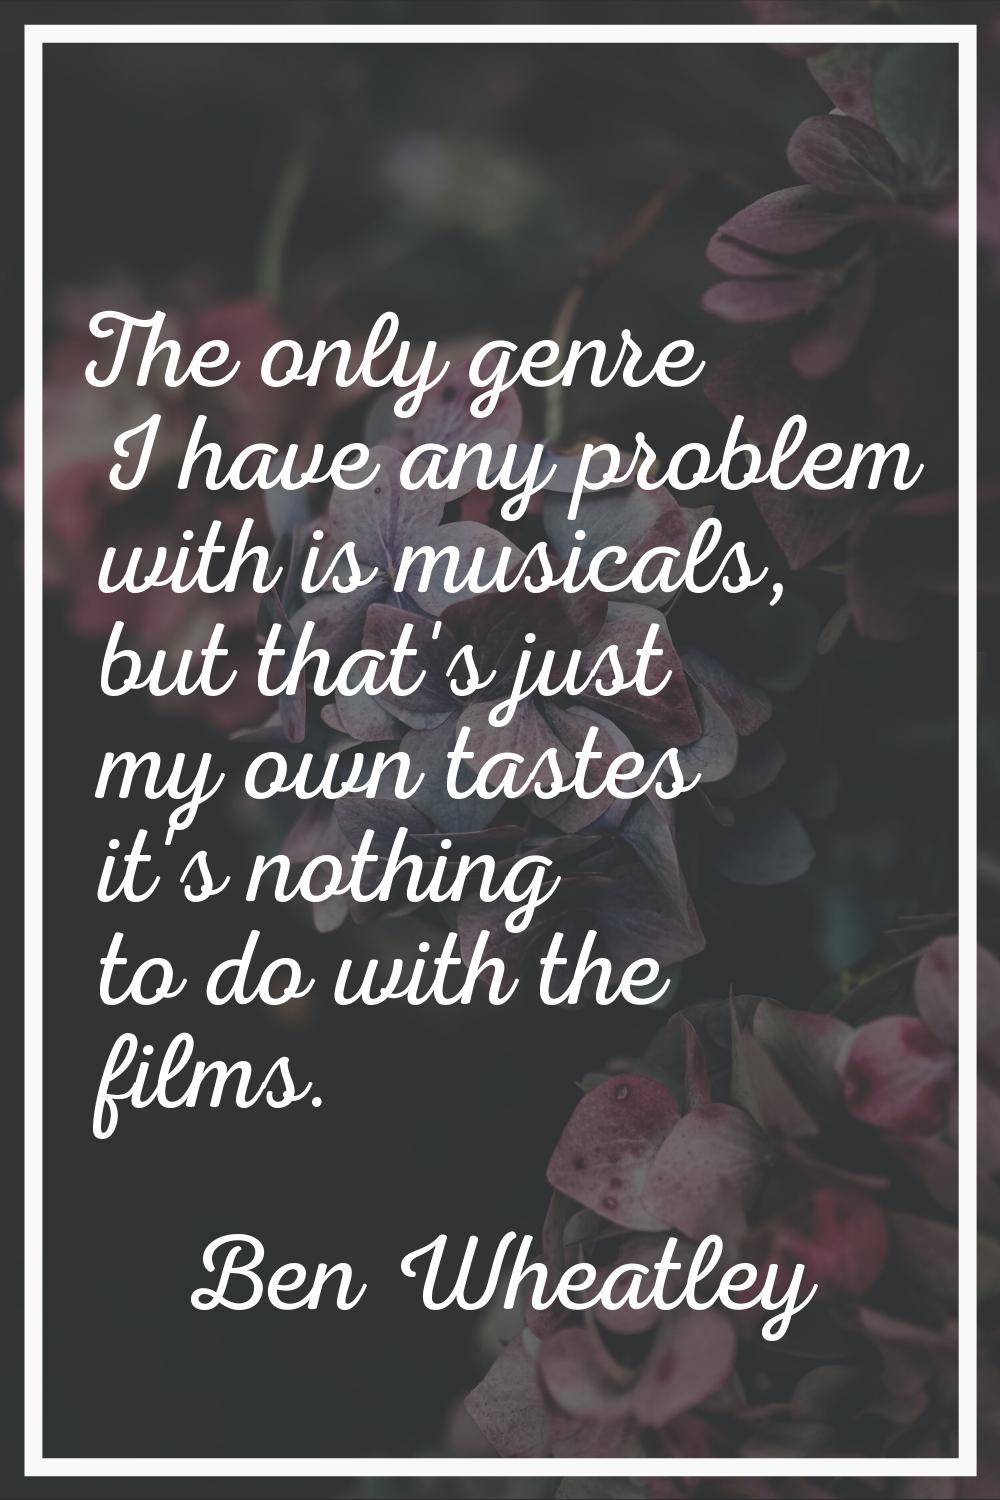 The only genre I have any problem with is musicals, but that's just my own tastes it's nothing to d